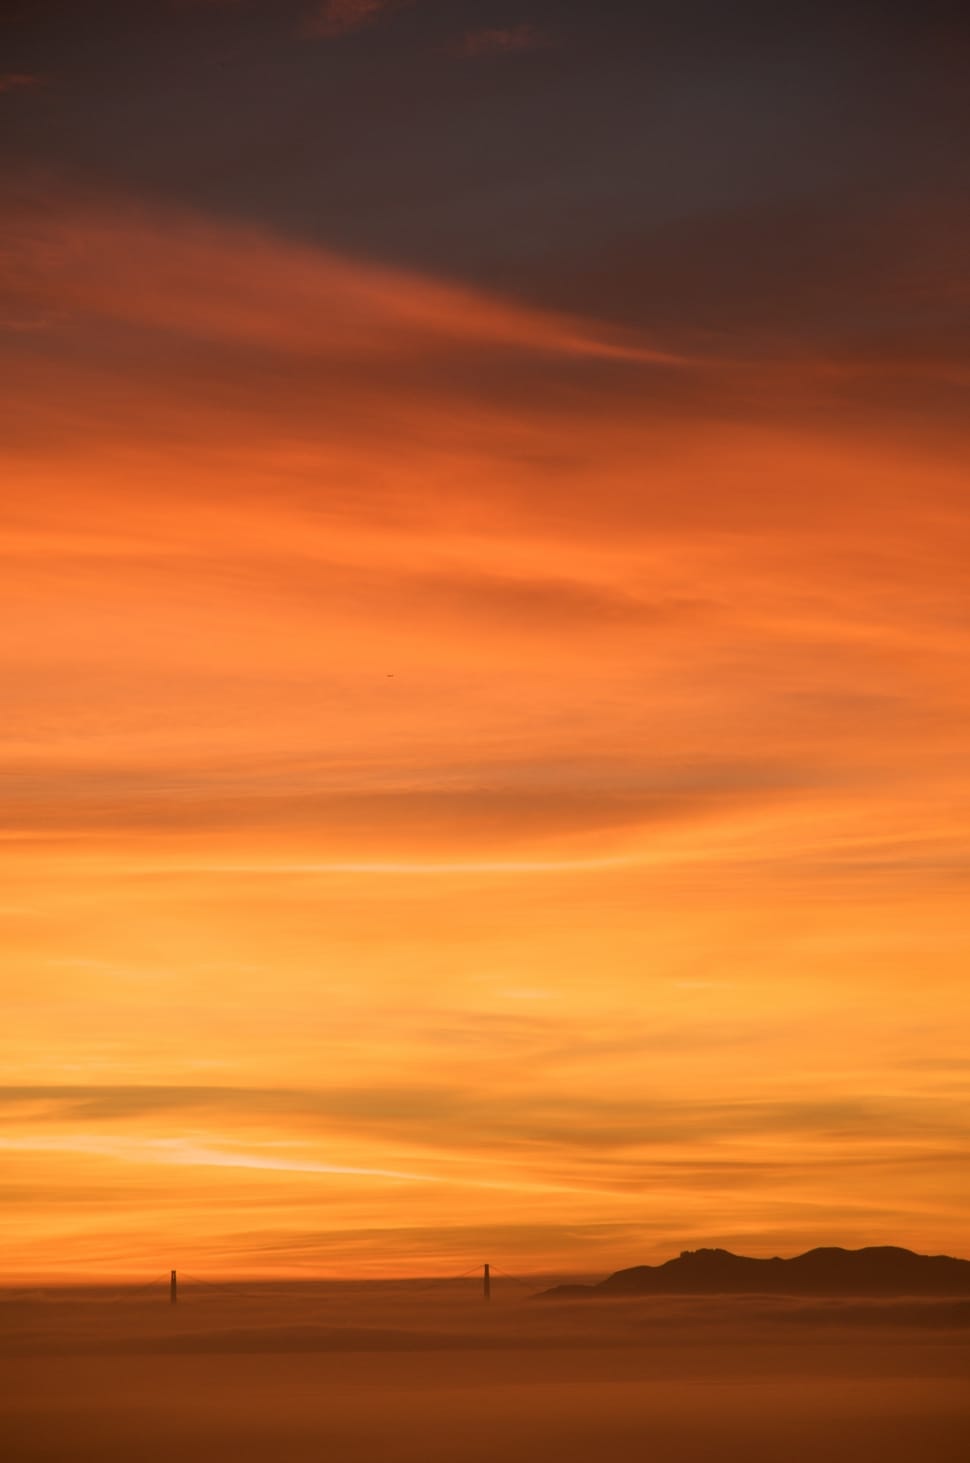 Cloudy, Sunset, Orange, Sky, Clouds, sunset, orange color preview